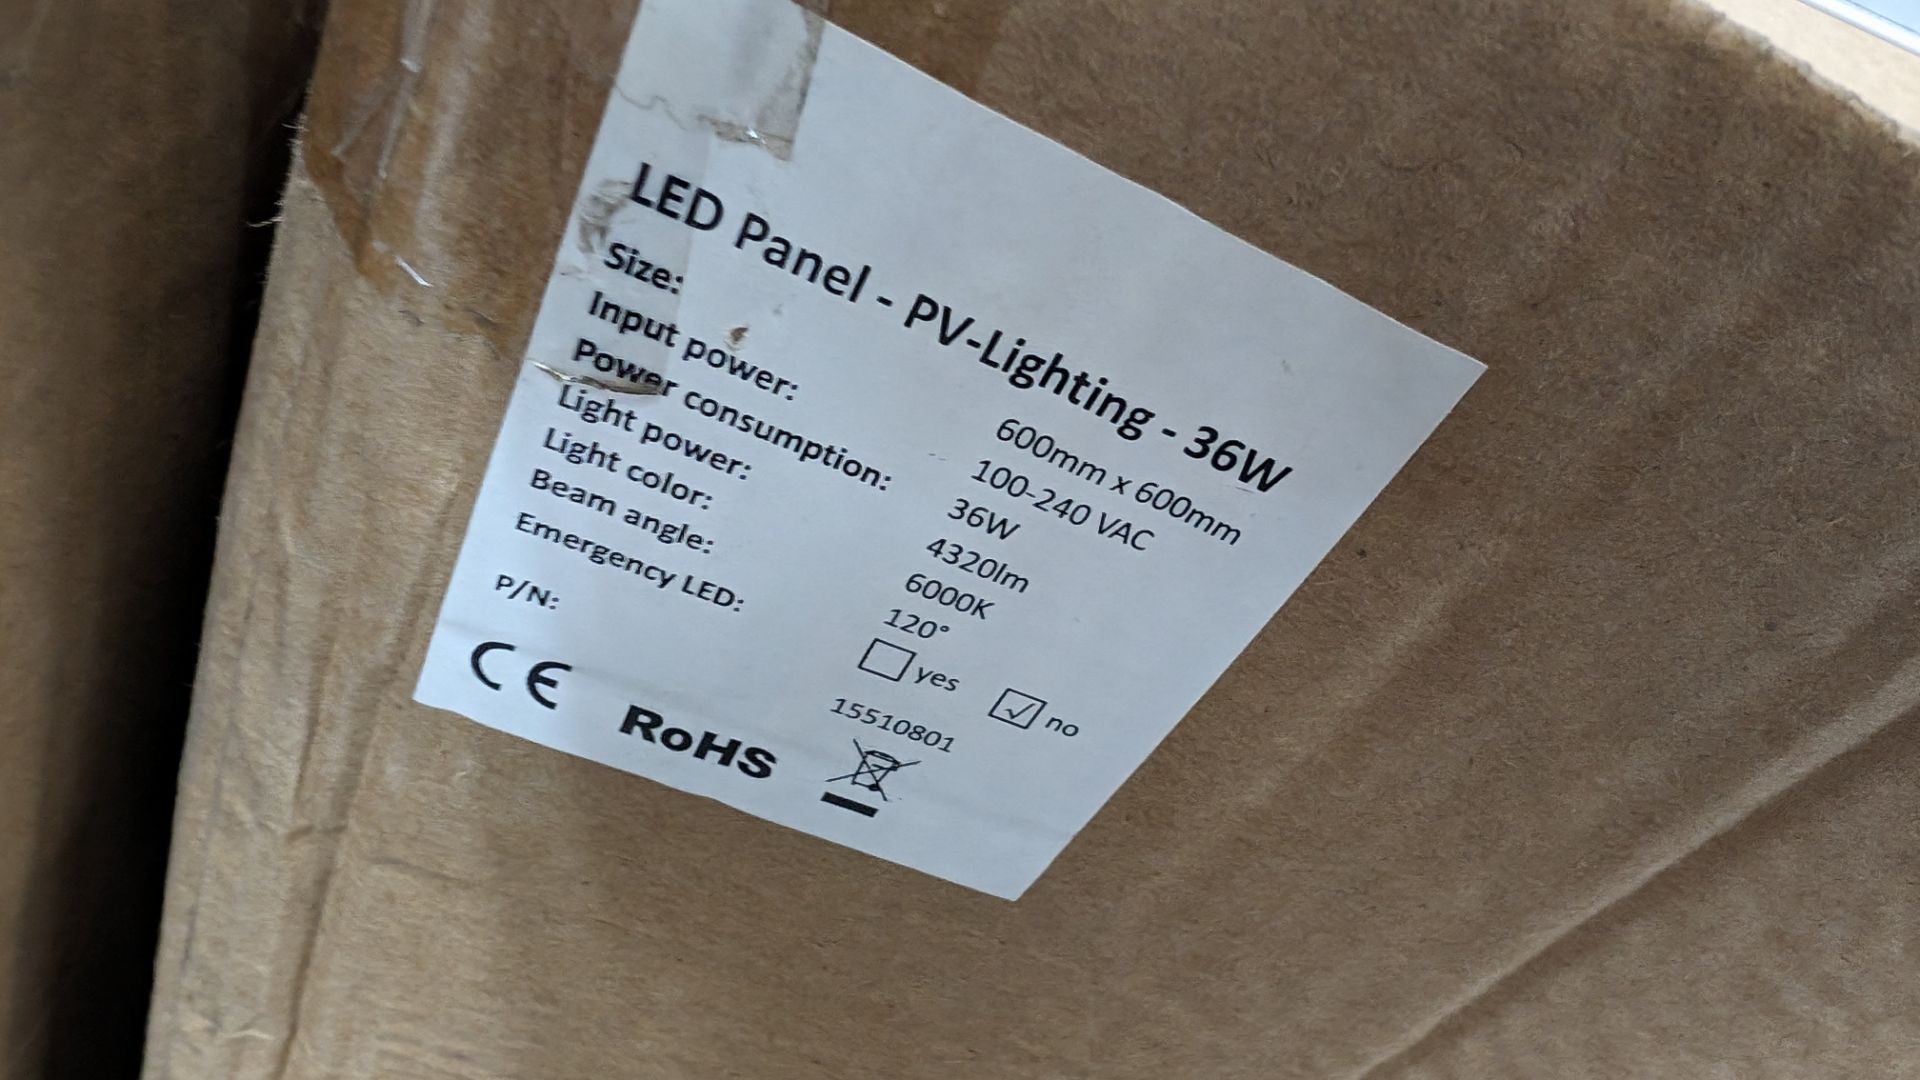 16 off 600mm x 600mm 36w 6000k 4320 lumens cold white LED lighting panels. 36w drivers. This lot c - Image 8 of 16